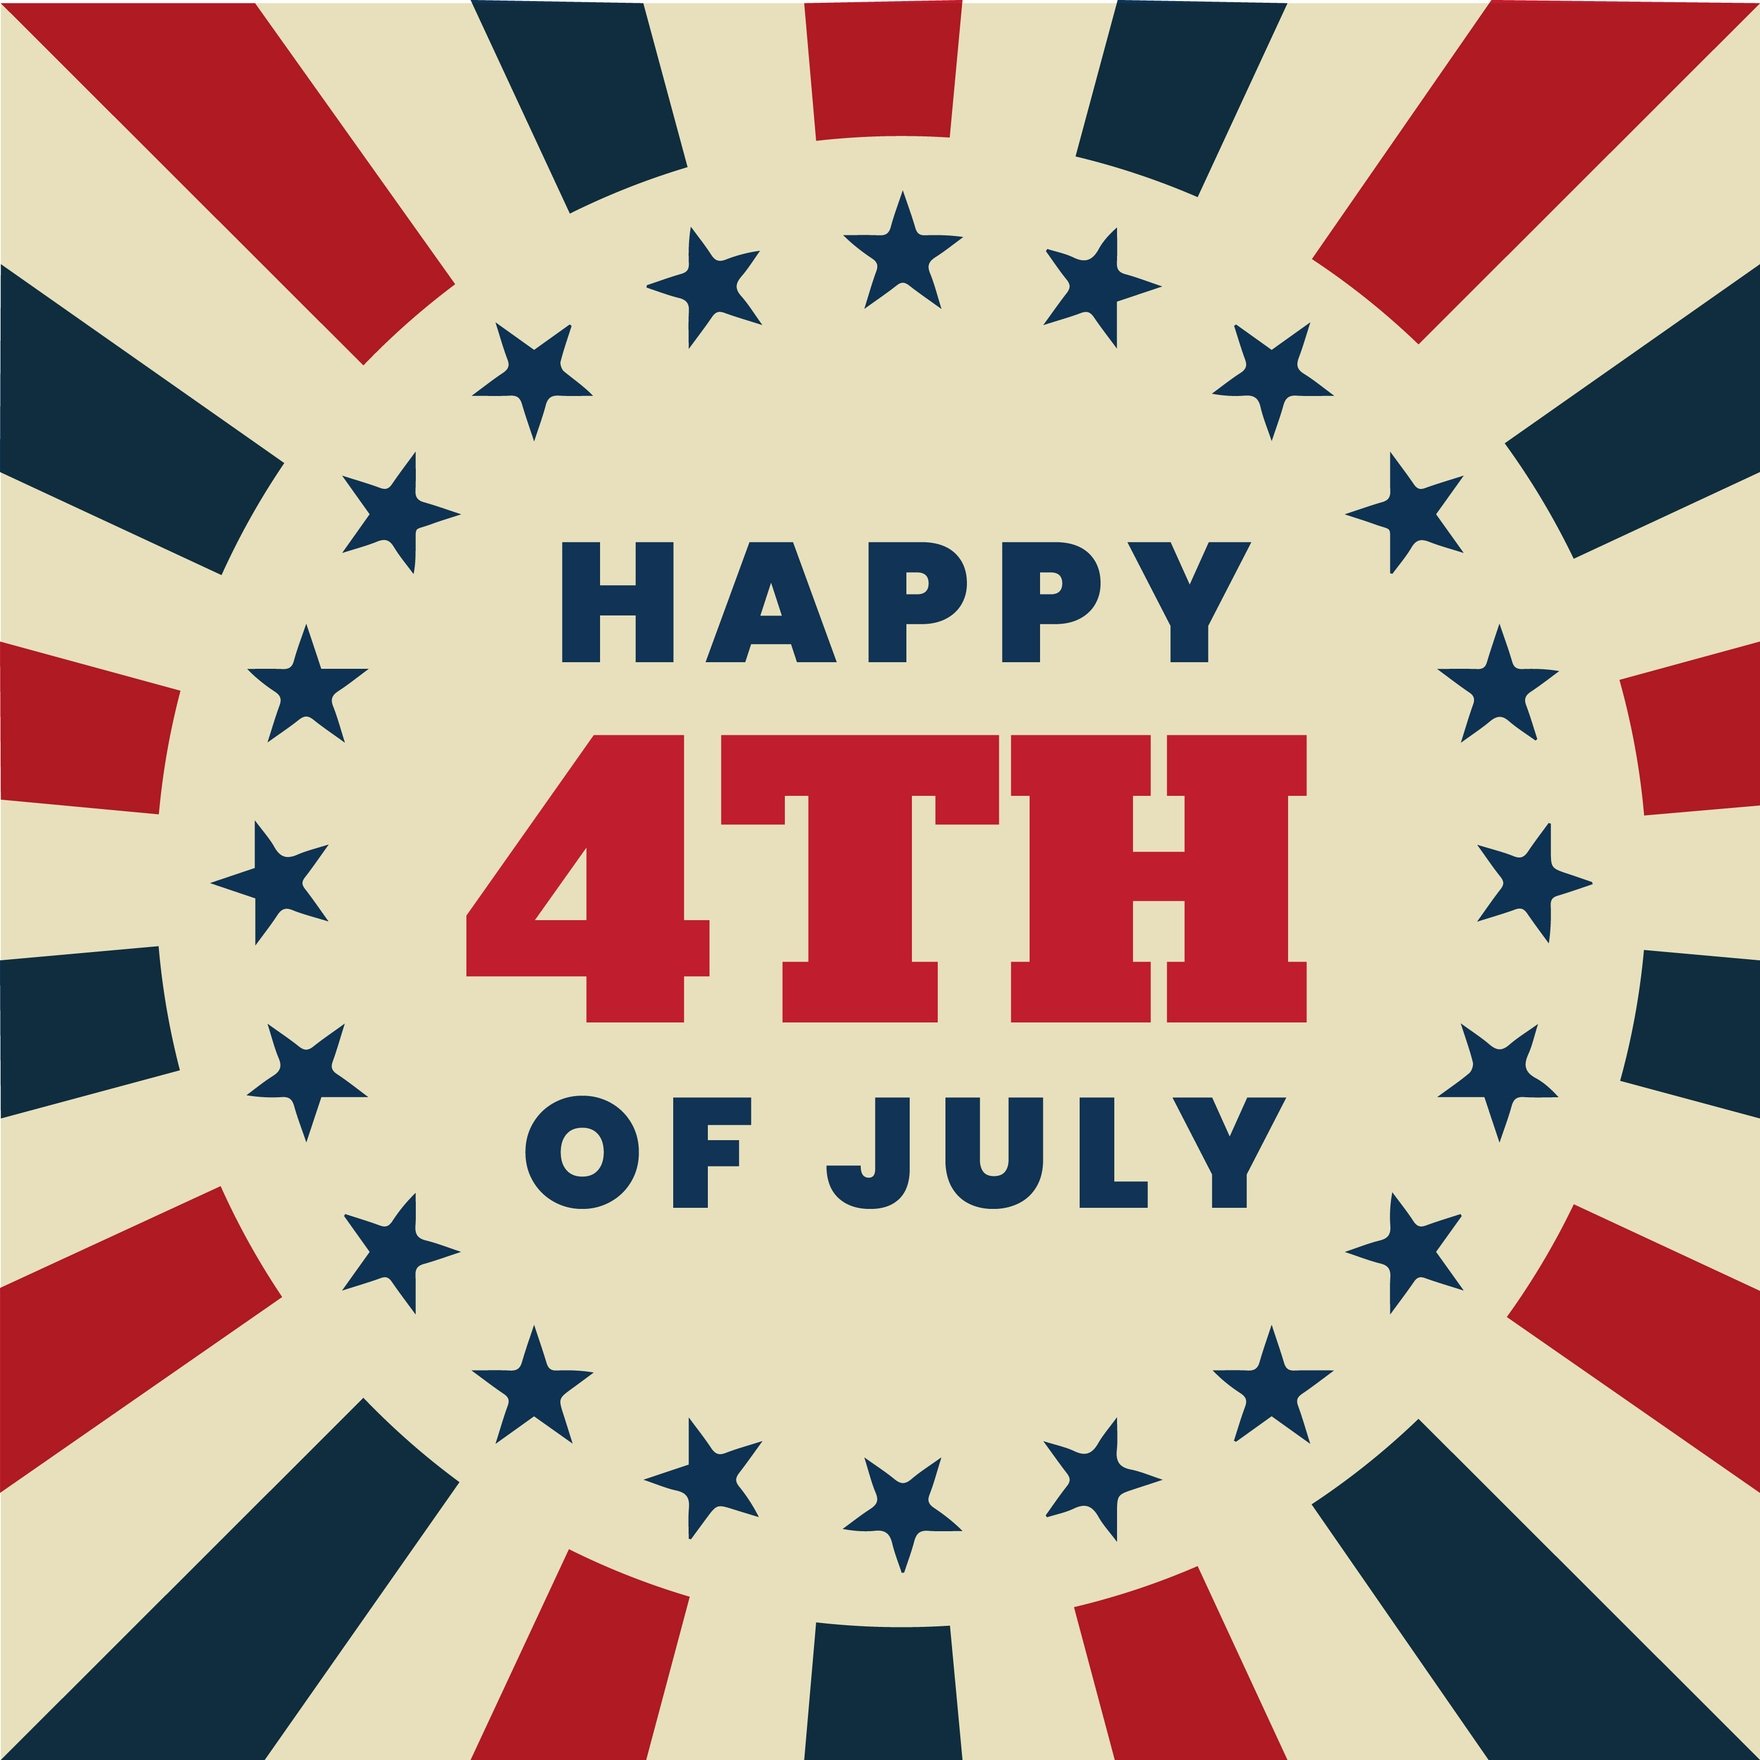 Retro 4th Of July Gif in Illustrator, EPS, SVG, JPG, GIF, PNG, After Effects